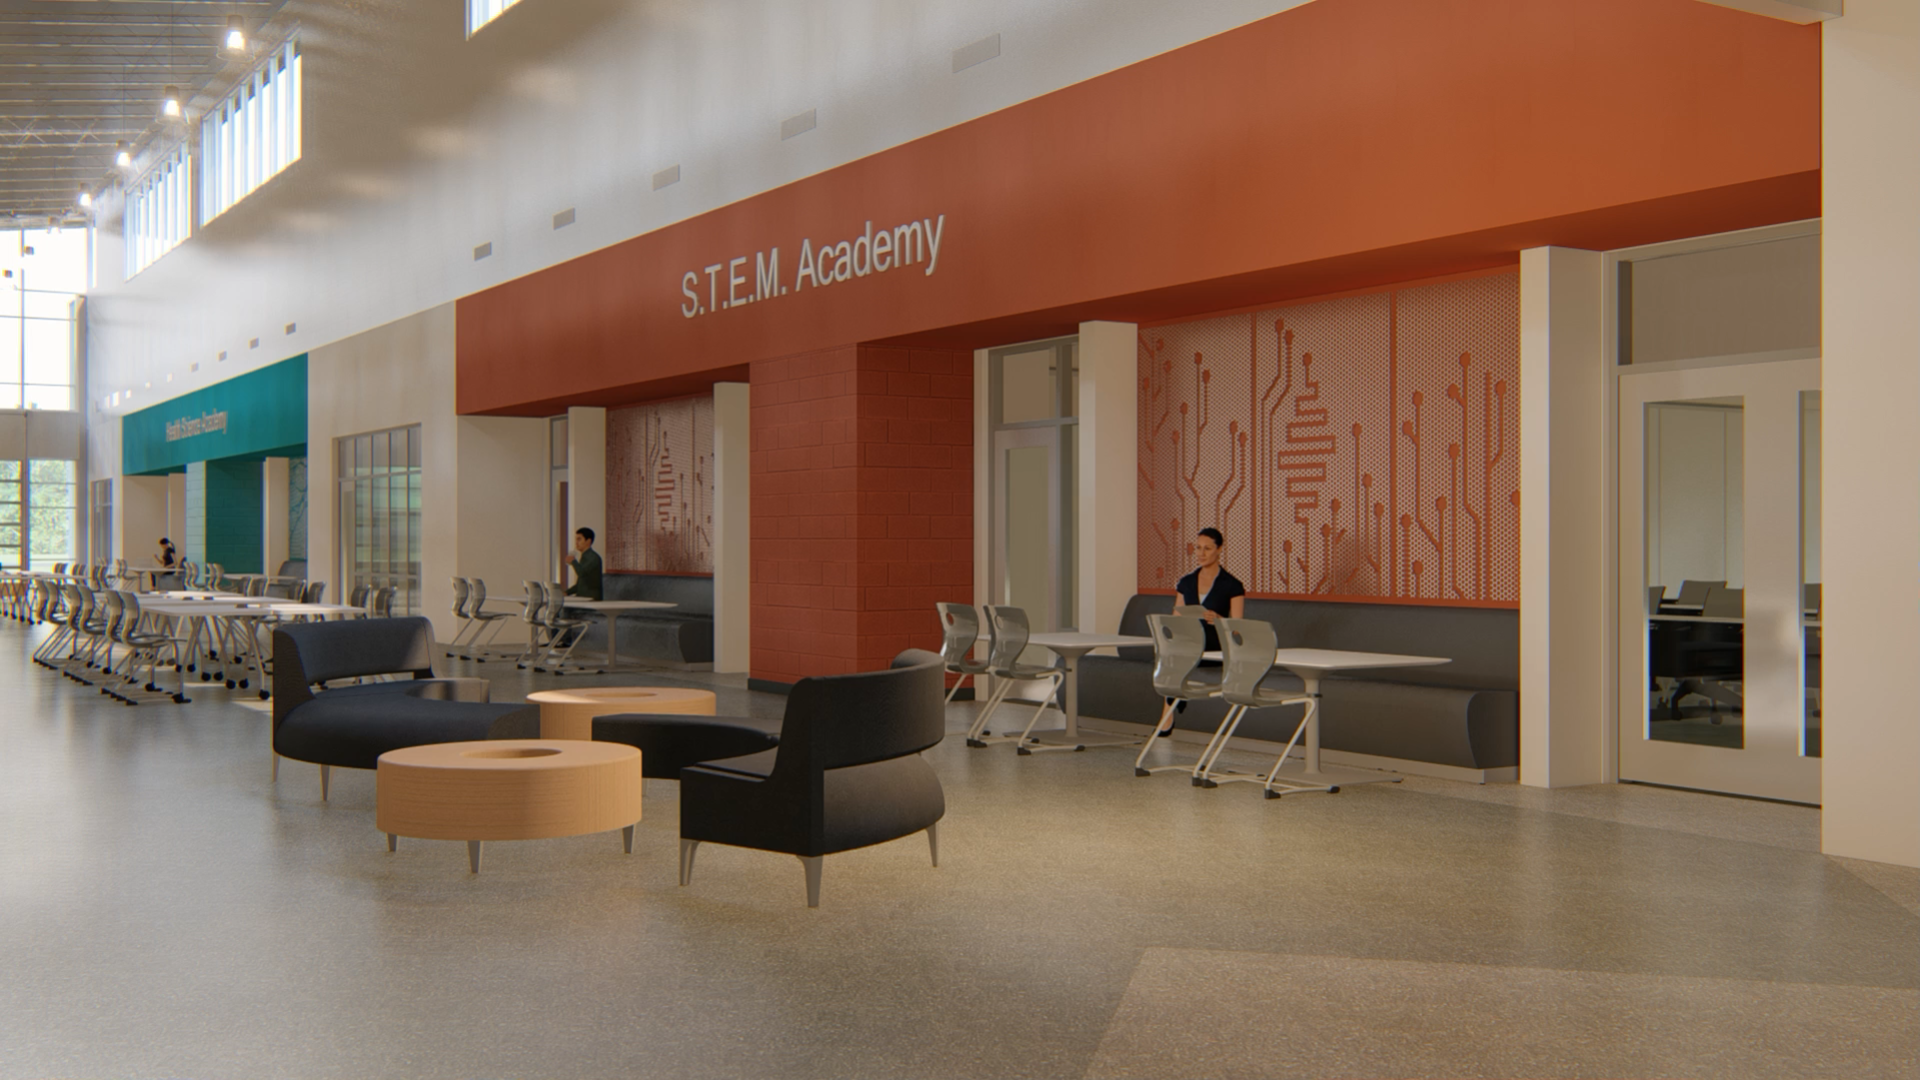 an artist 's impression of the new stem academy building .